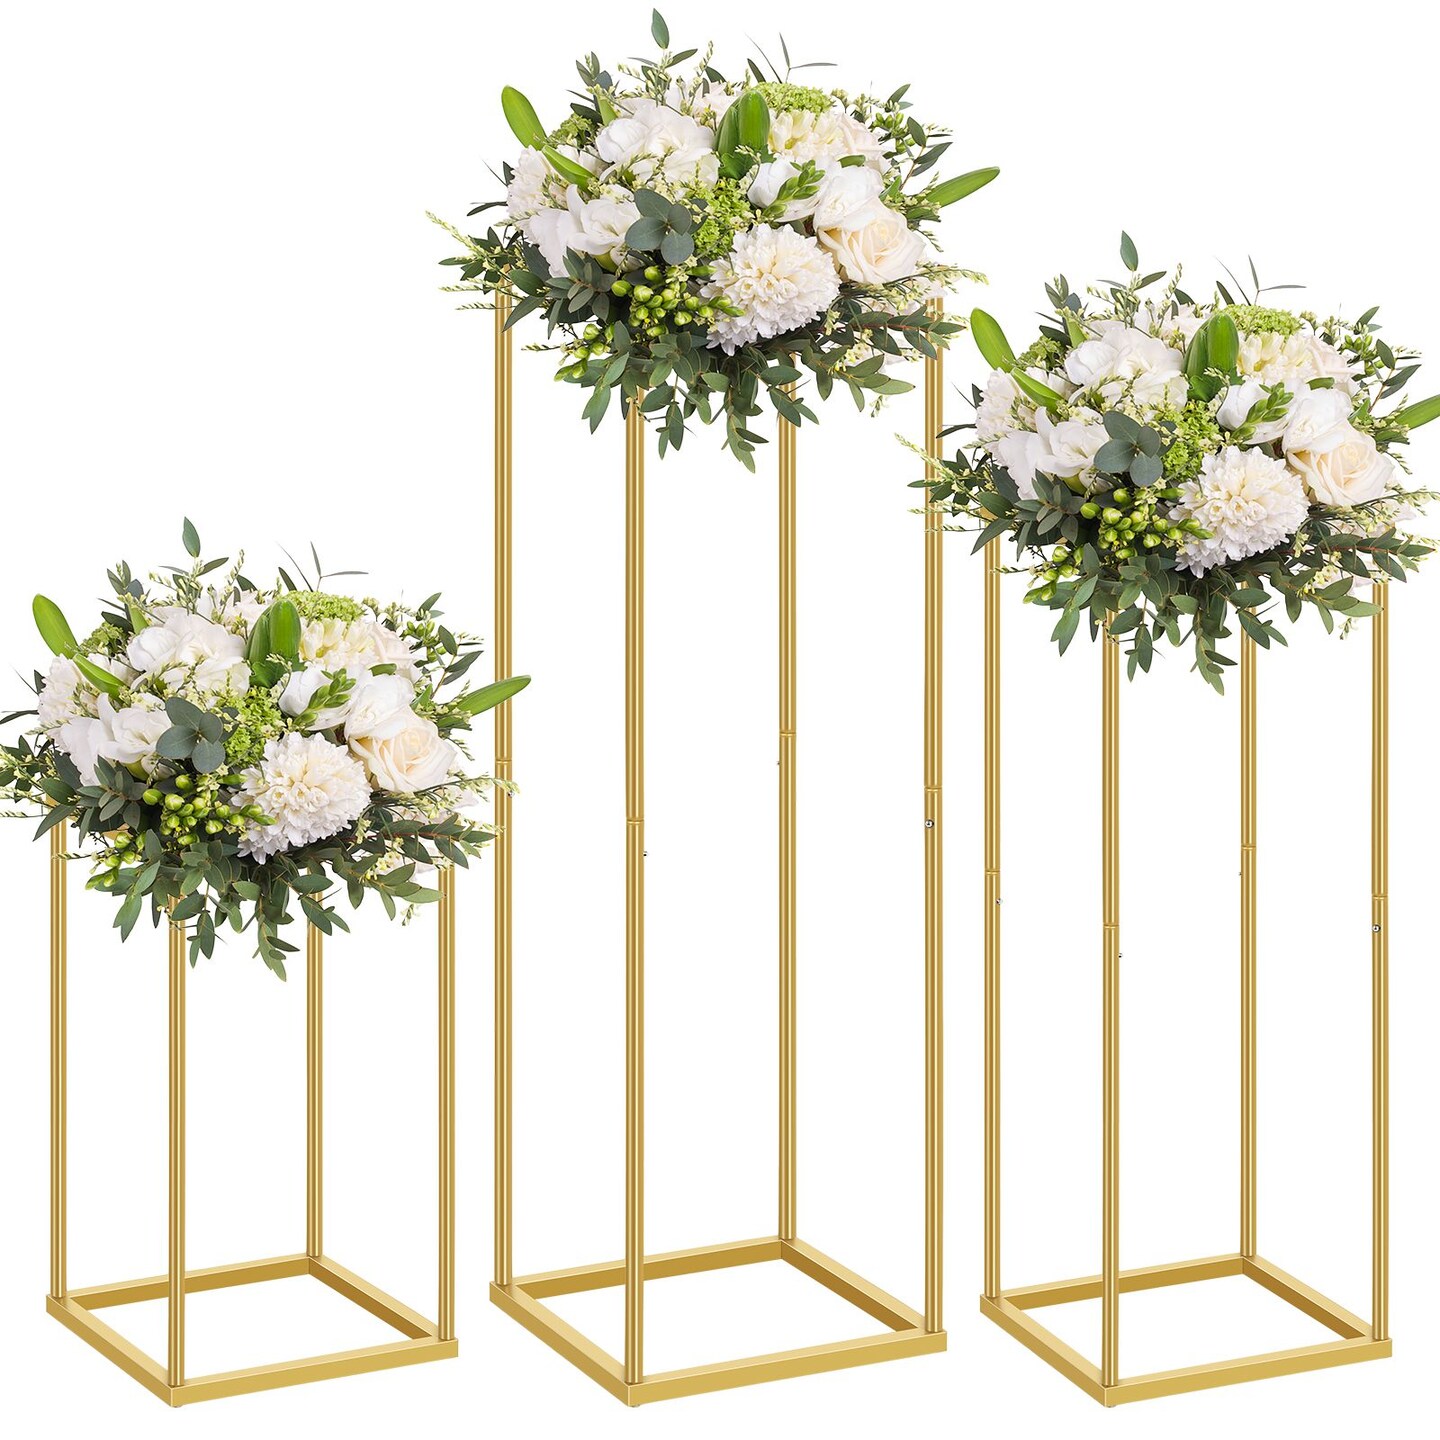 3pcs s + m + l Wedding Centerpieces for Tables with Mesh Plates for Party, Weddings